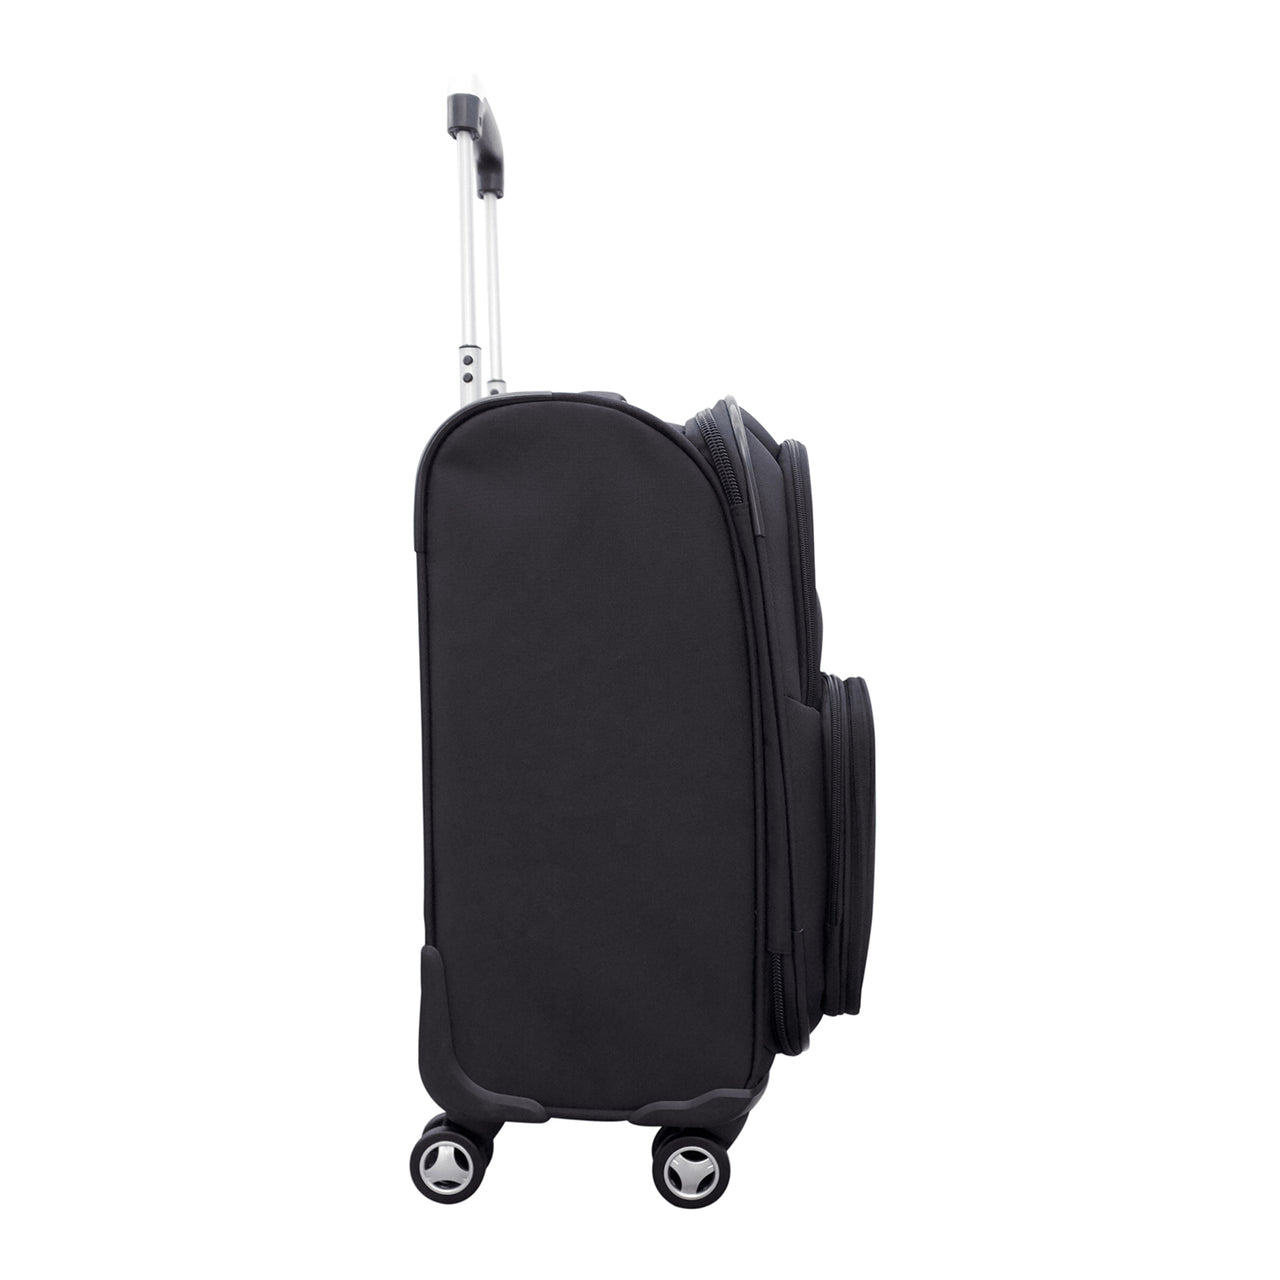 Avalanche Luggage | Colorado Avalanche 20" Carry-on Spinner Luggage